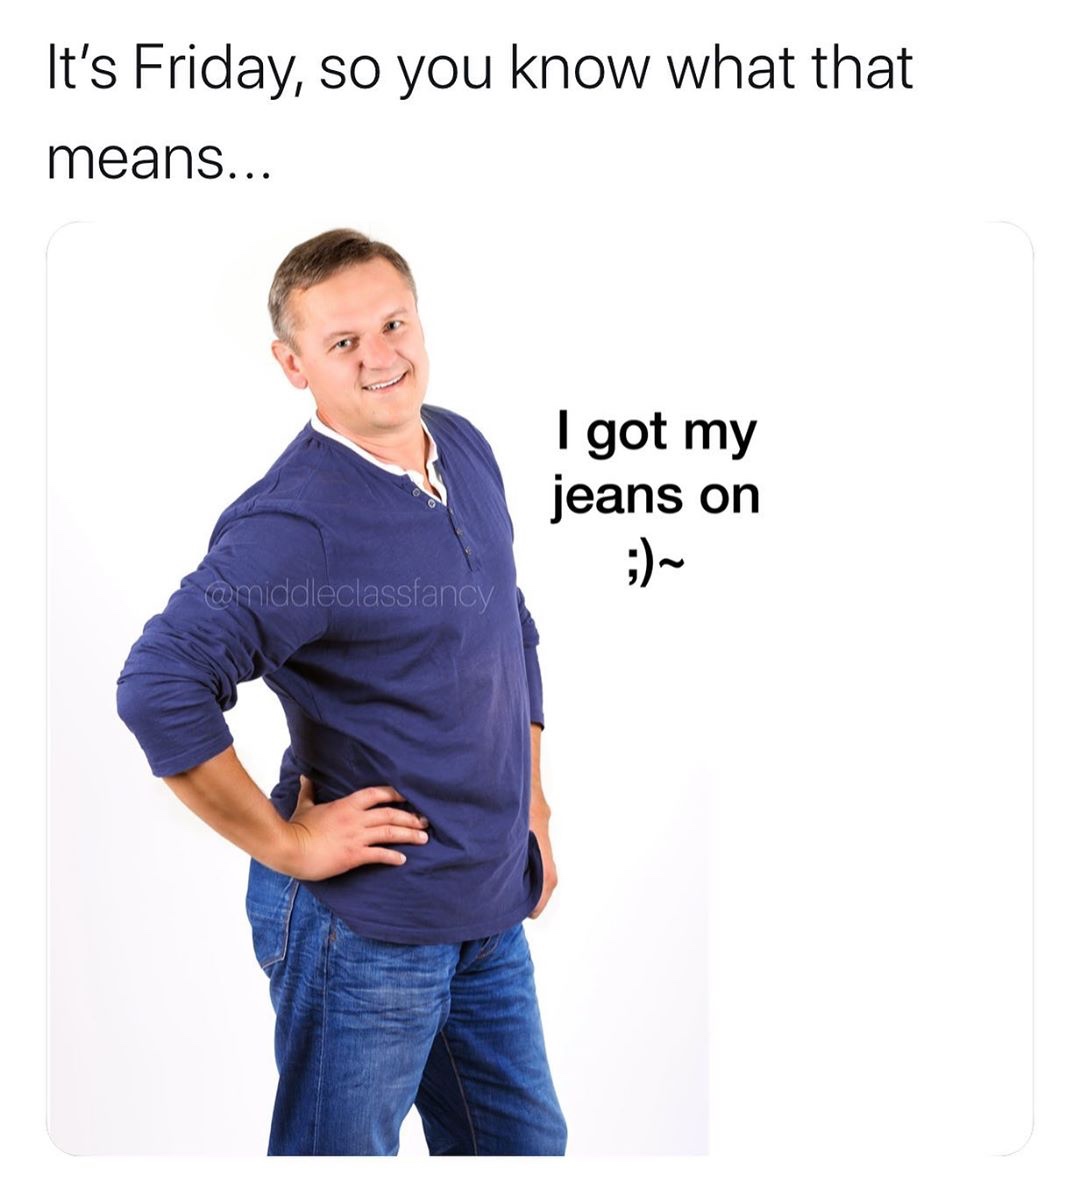 middle class fancy meme - It's Friday, so you know what that means... I got my jeans on